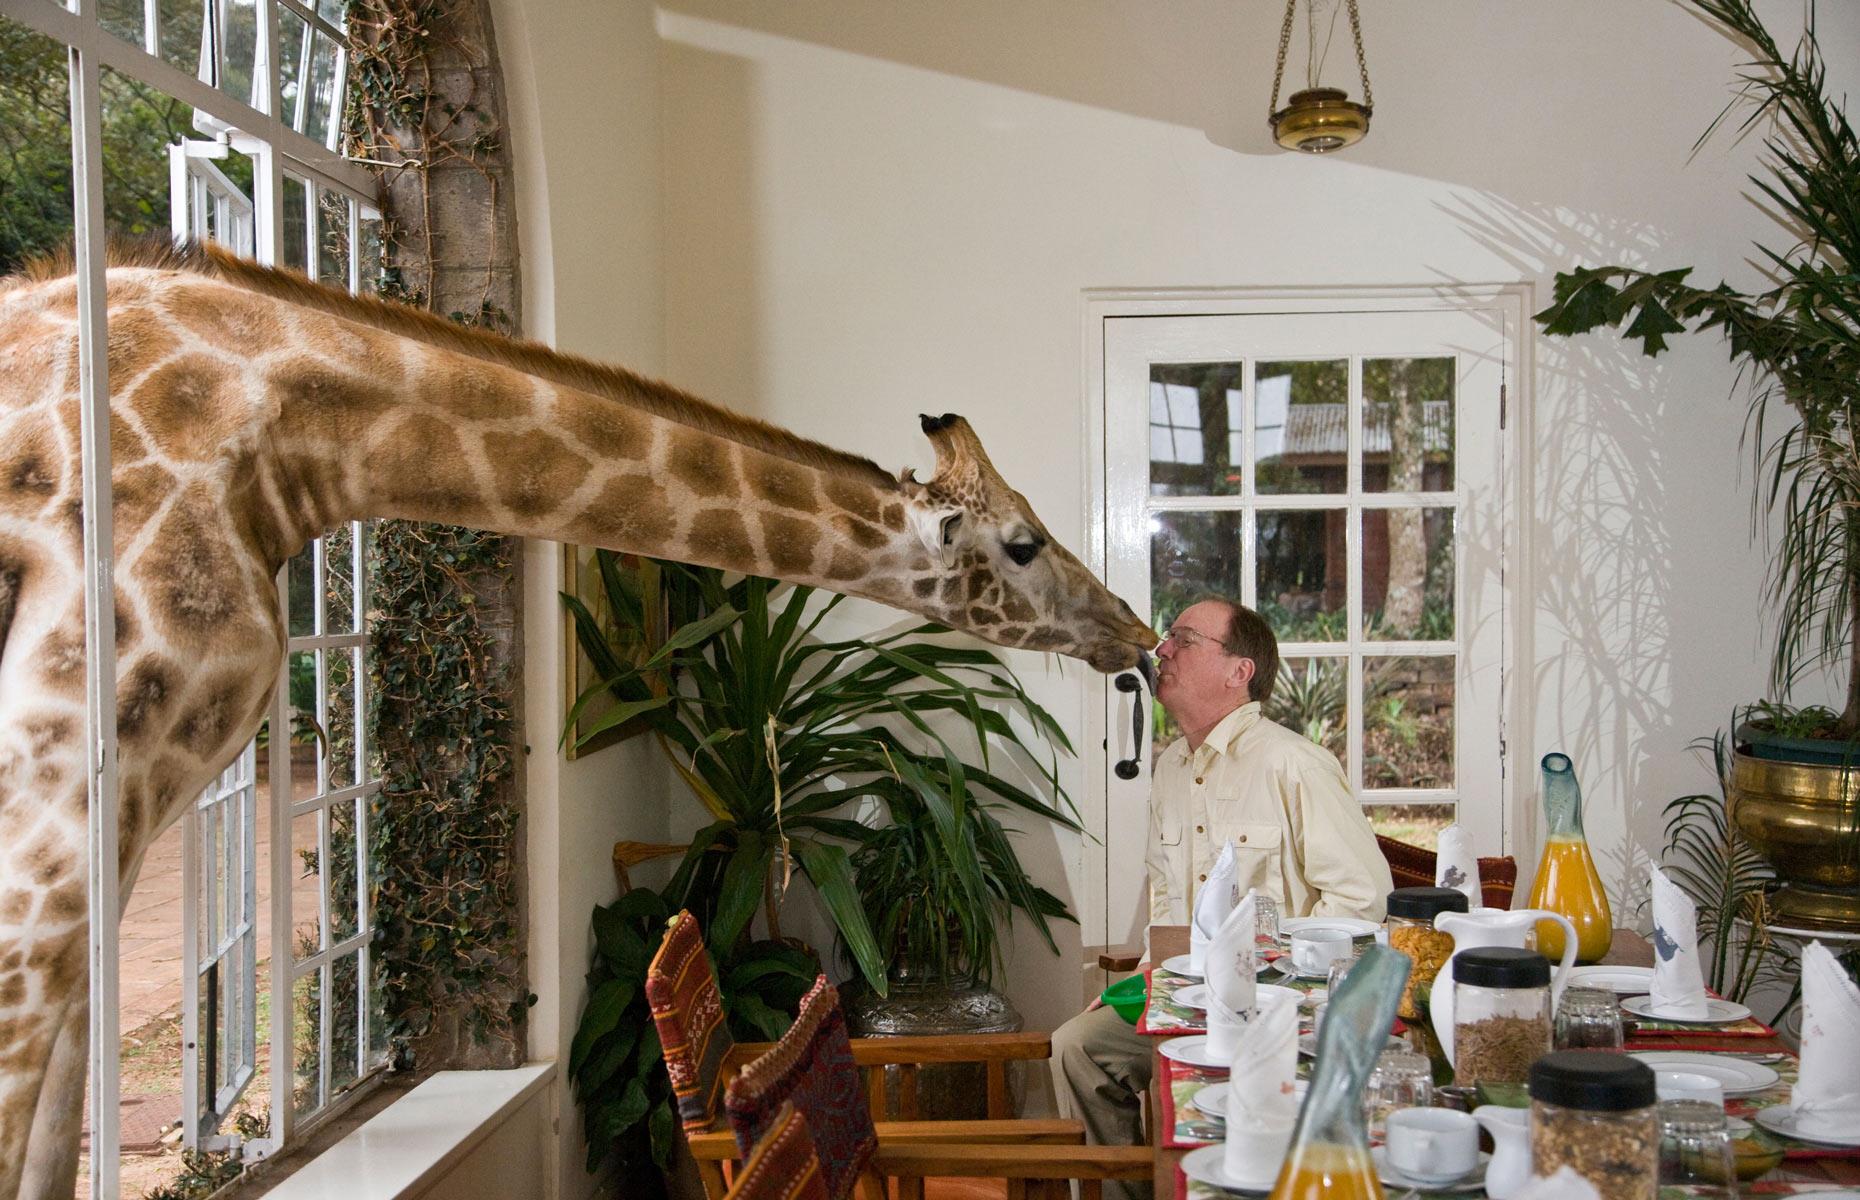 <p>The children will think they’ve stepped into a storybook at Giraffe Manor, a grand 1930s mansion near Nairobi. Except it’s not a tiger who’s coming to tea but giraffes coming for breakfast. The herd of resident Rothschild giraffes visit most mornings and evenings, peering into the windows in the hope of a tasty treat before retreating to their forest sanctuary. It’s not just the children who will be entranced by these graceful giants.</p>